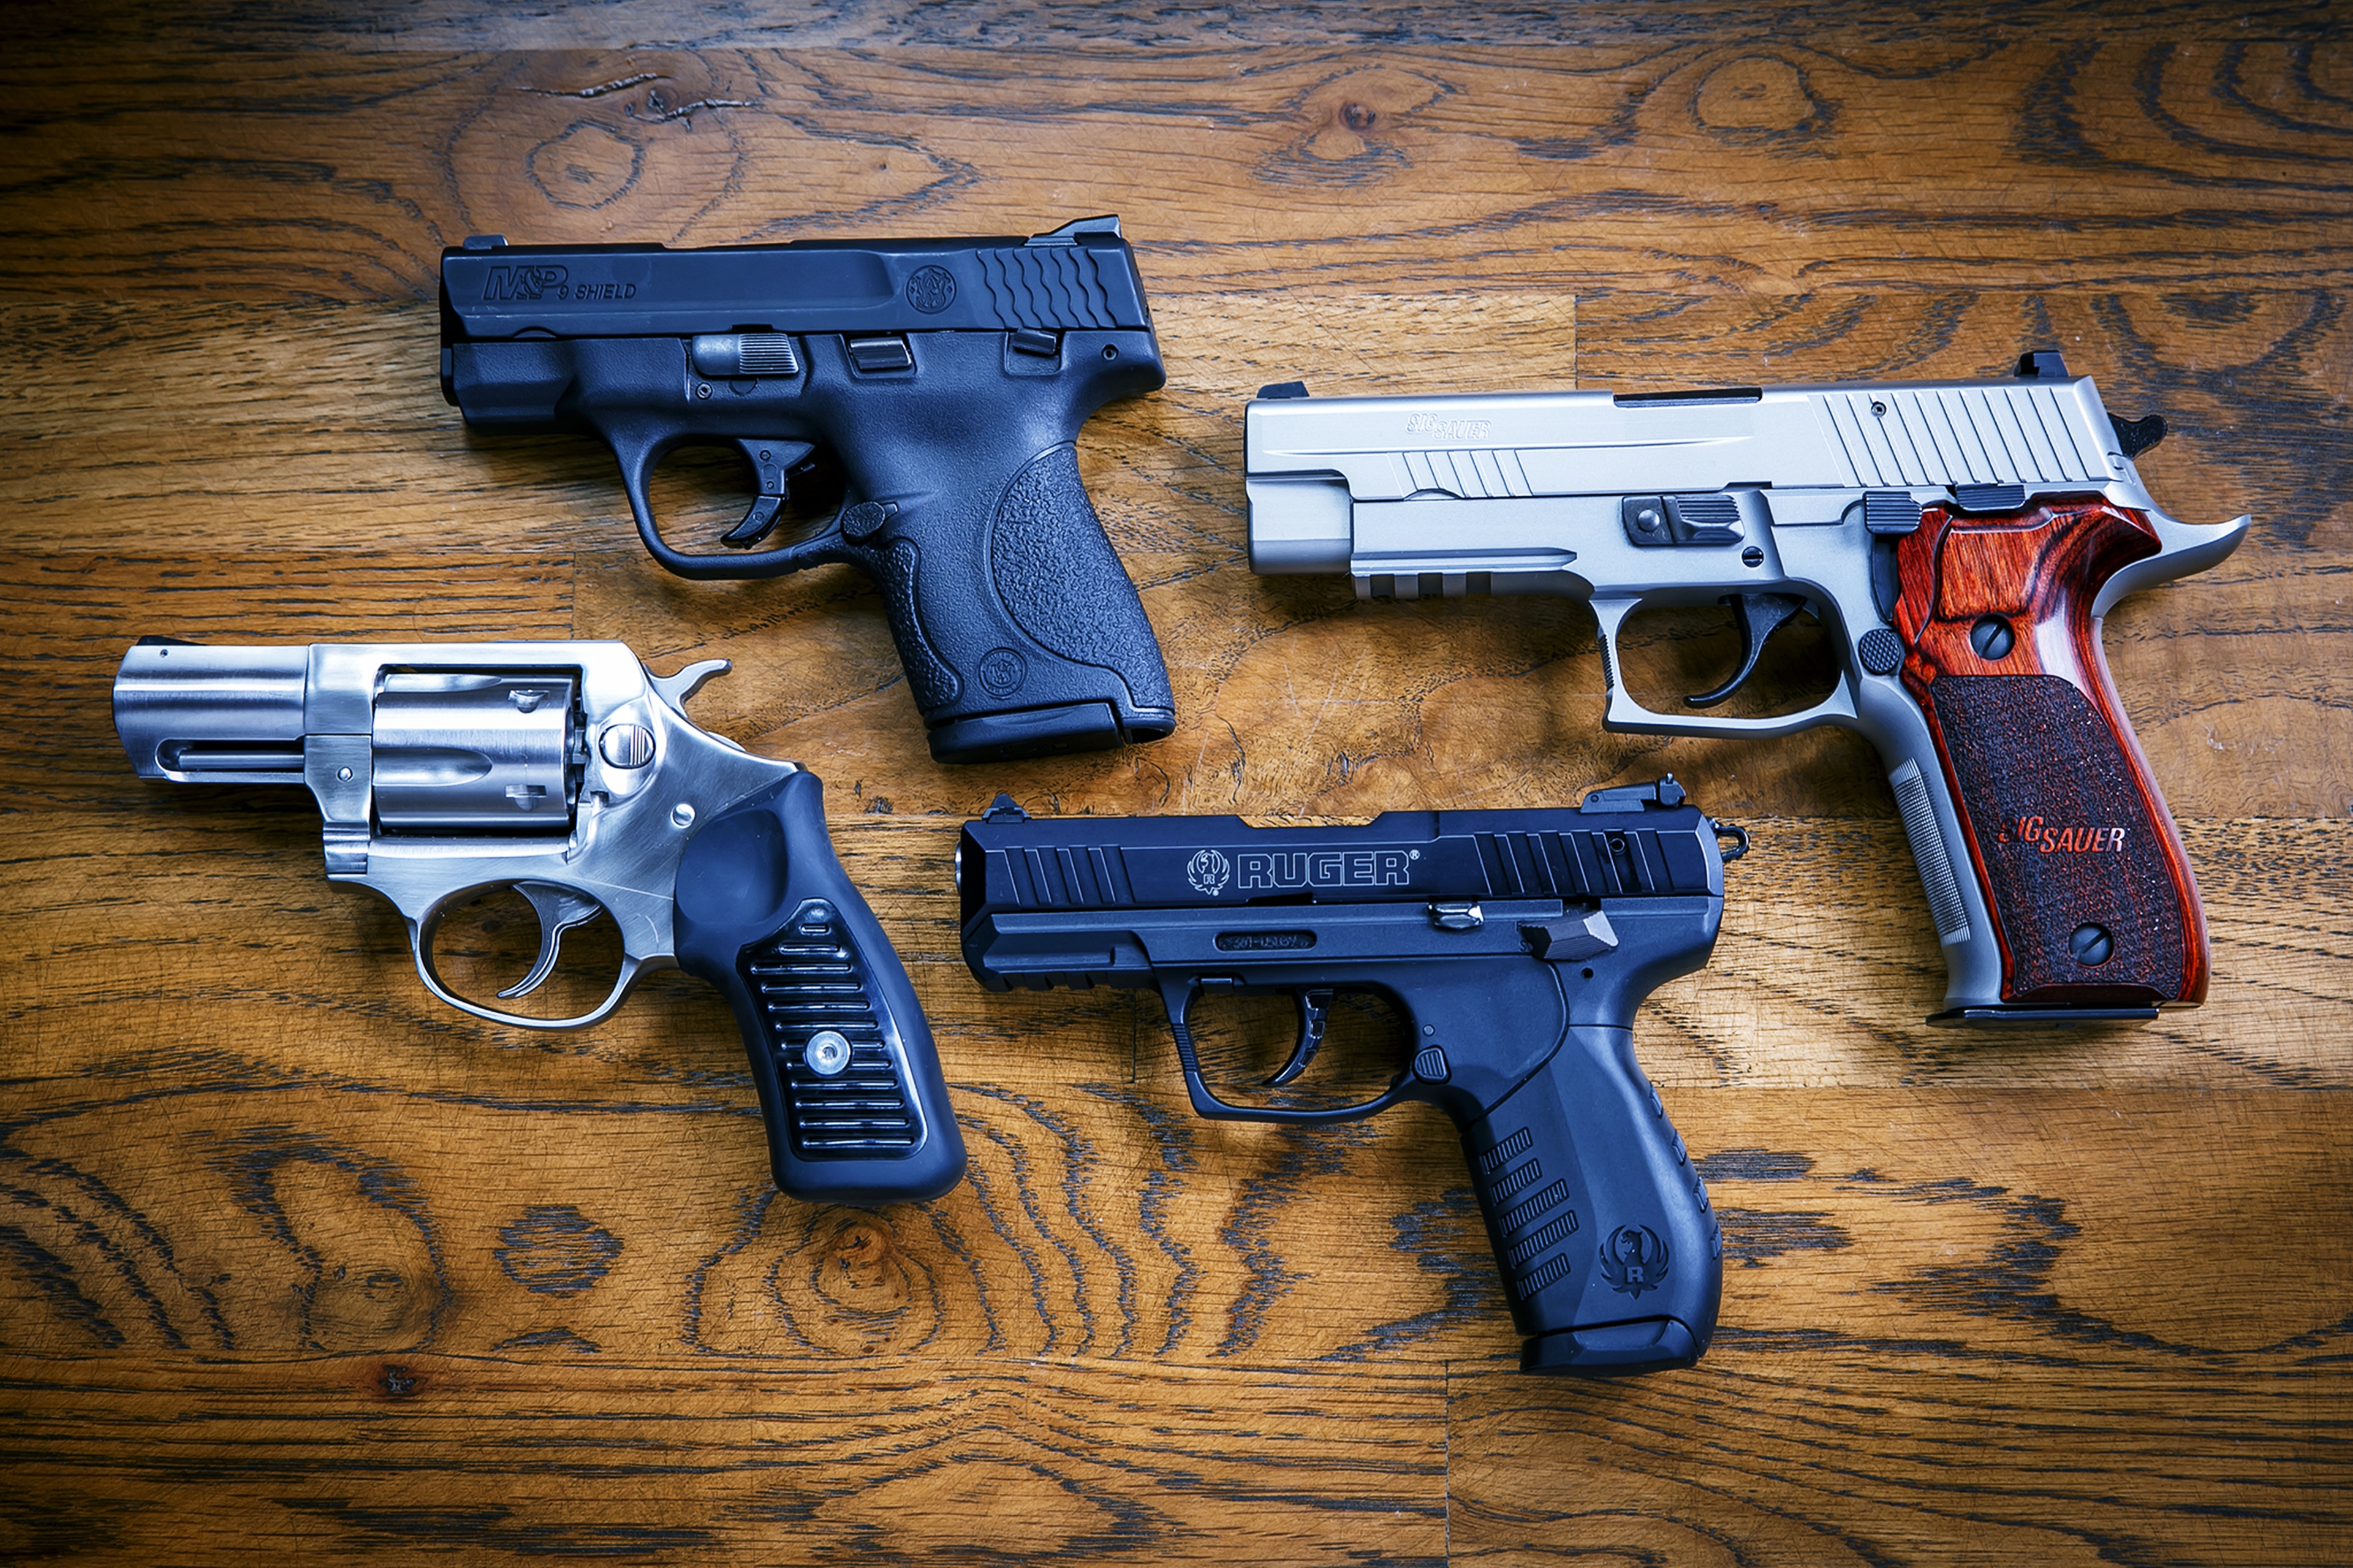 police, smith & wesson, weapons, pistol, ruger